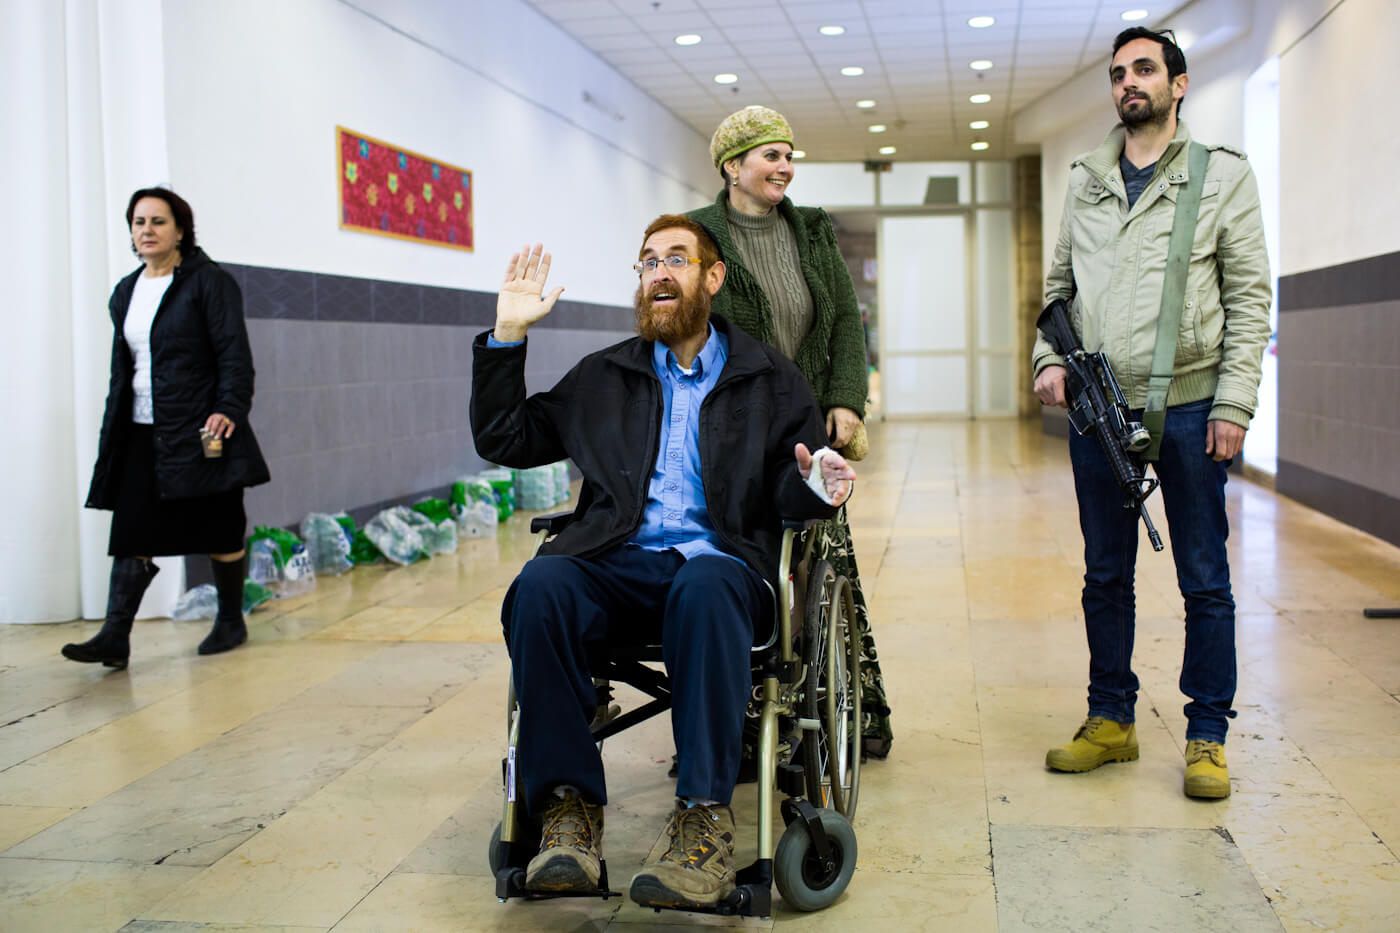 Yehuda Glick arrives to cast his vote during Likud party elections in Jerusalem, still healing from an alleged attack, Dec. 31, 2014. Oded Balilty | AP